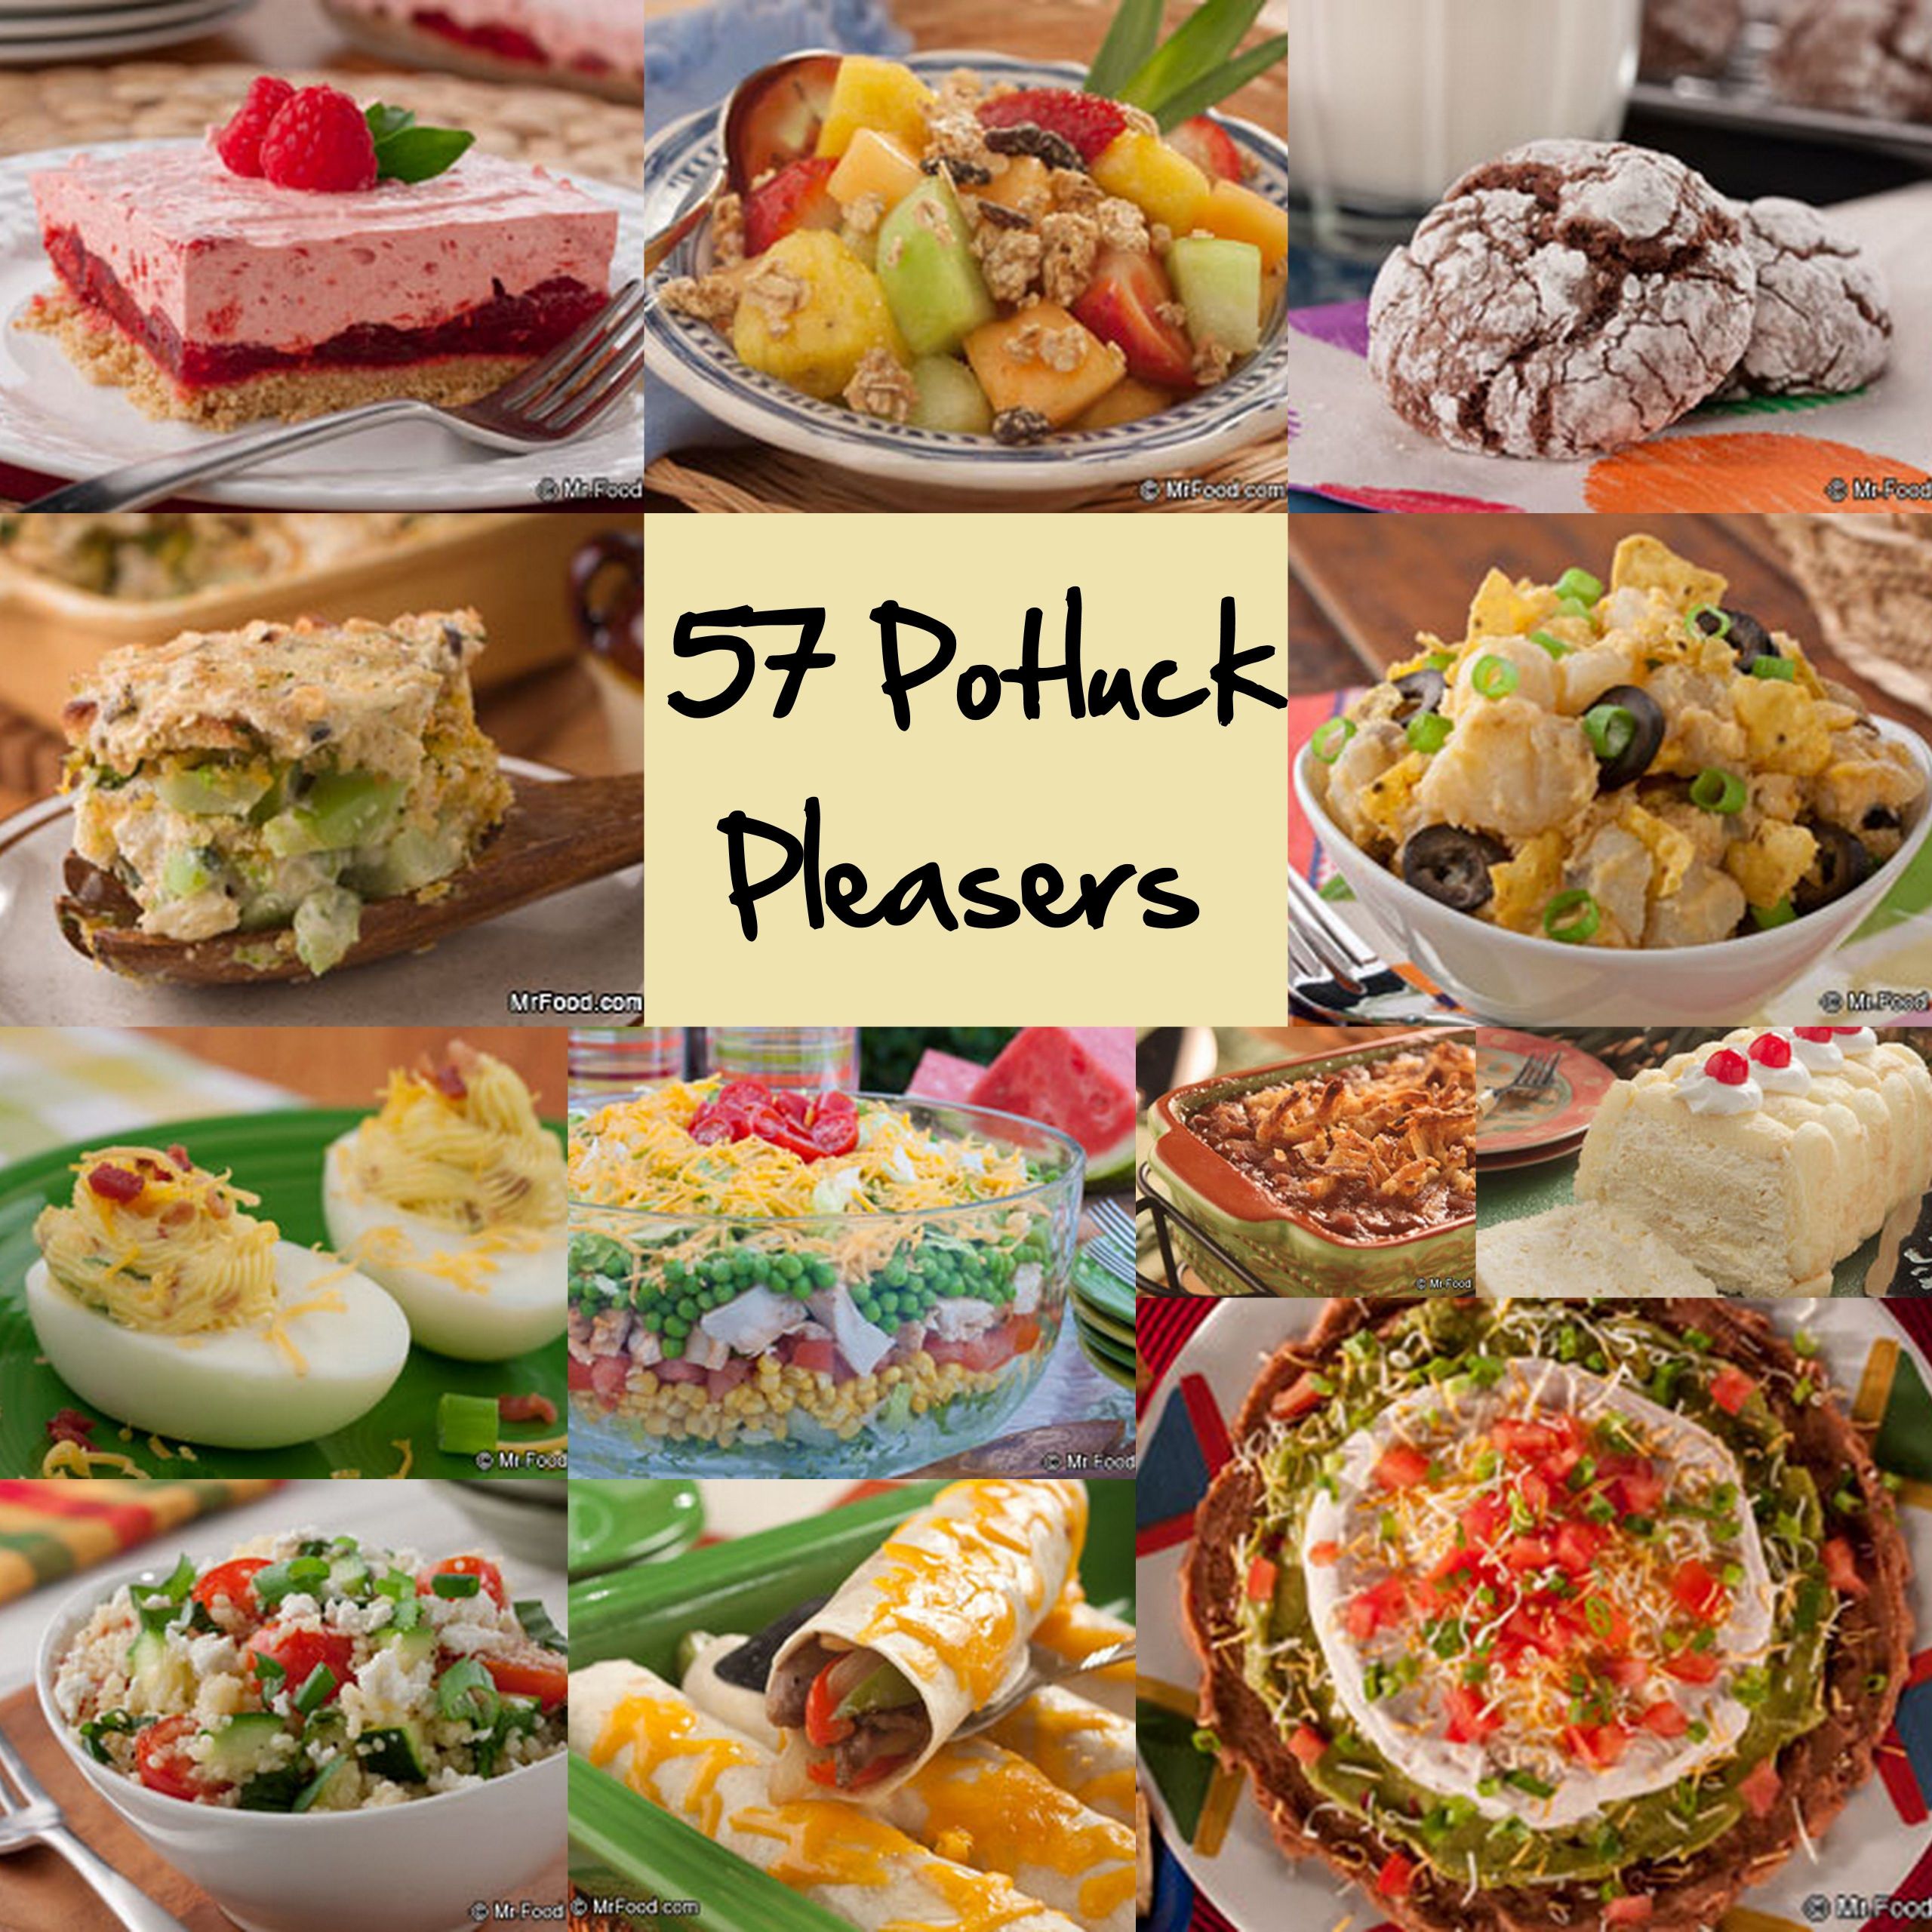 Holiday Party Potluck Ideas
 The next time you need that perfect potluck dish for a